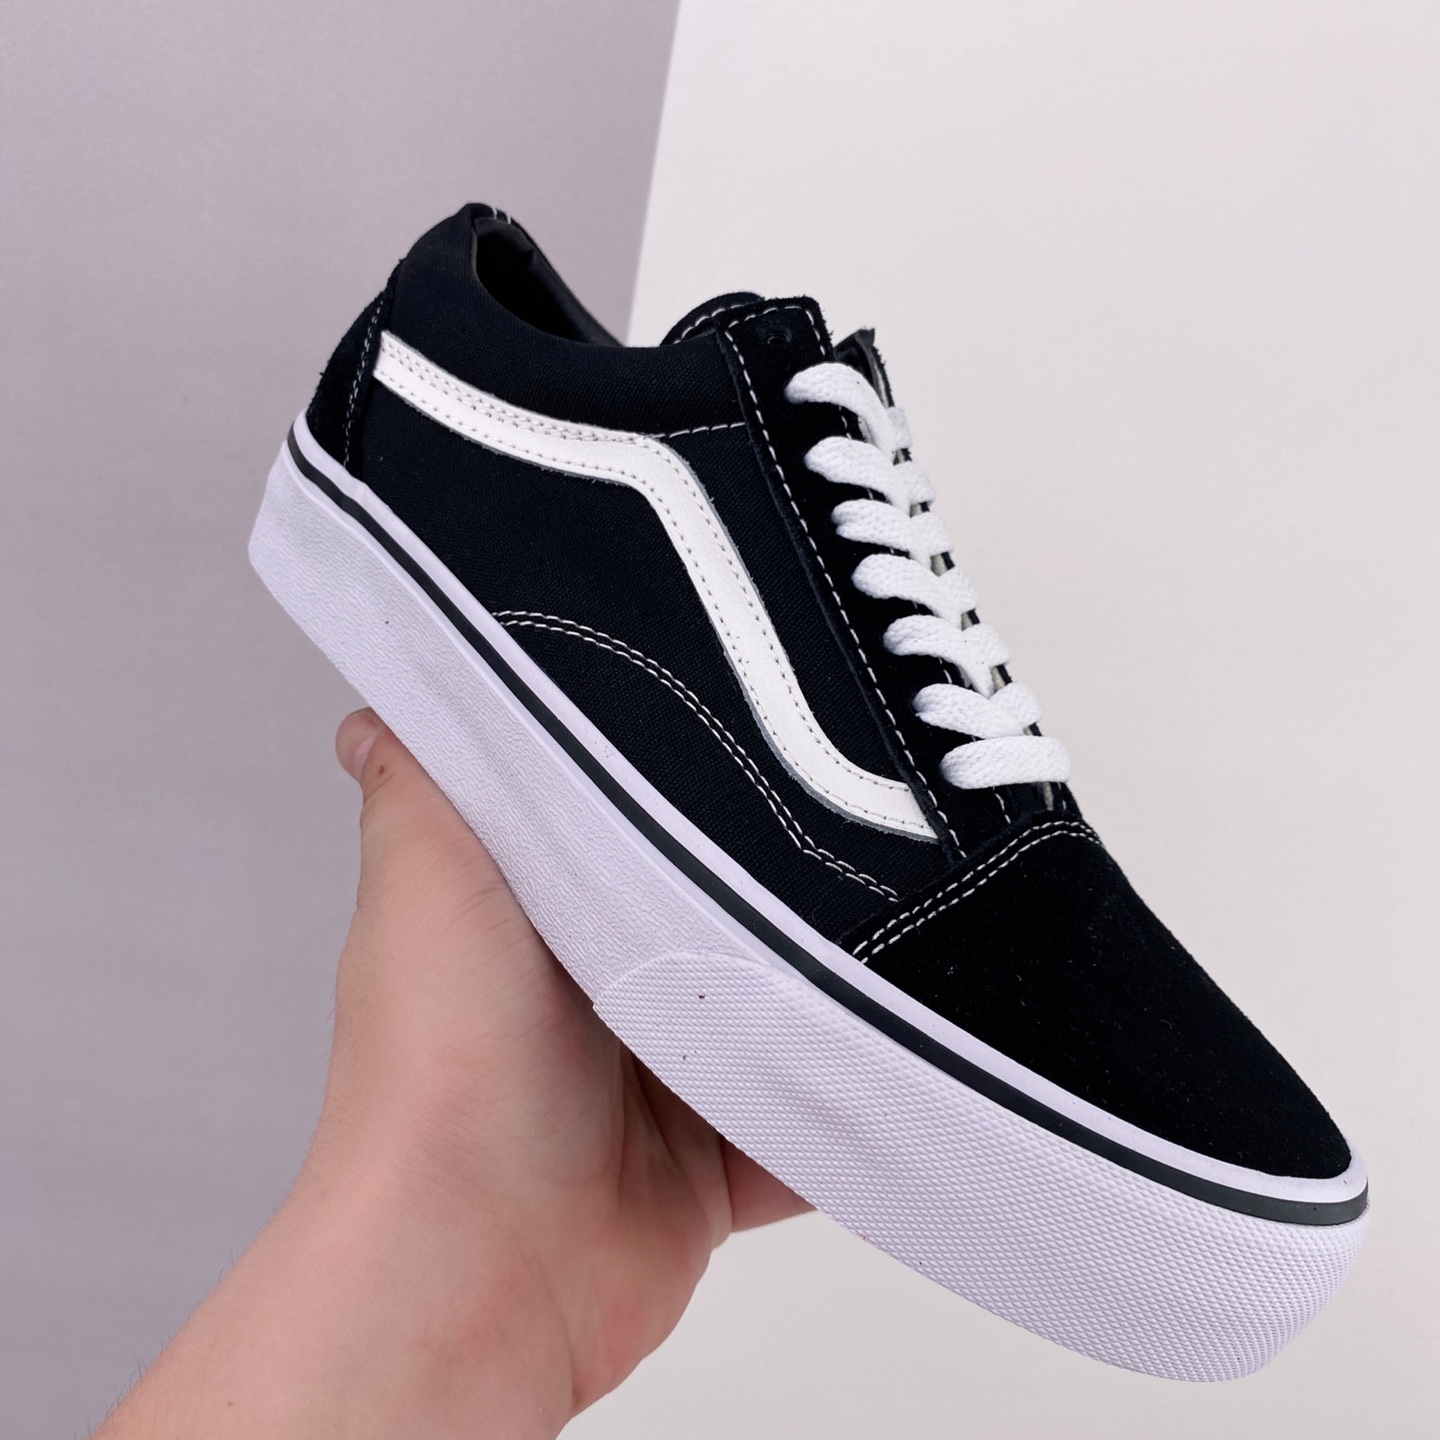 Vans Old Skool Comfy Cush 'Black White' - Classic Sneakers for All Day Comfort